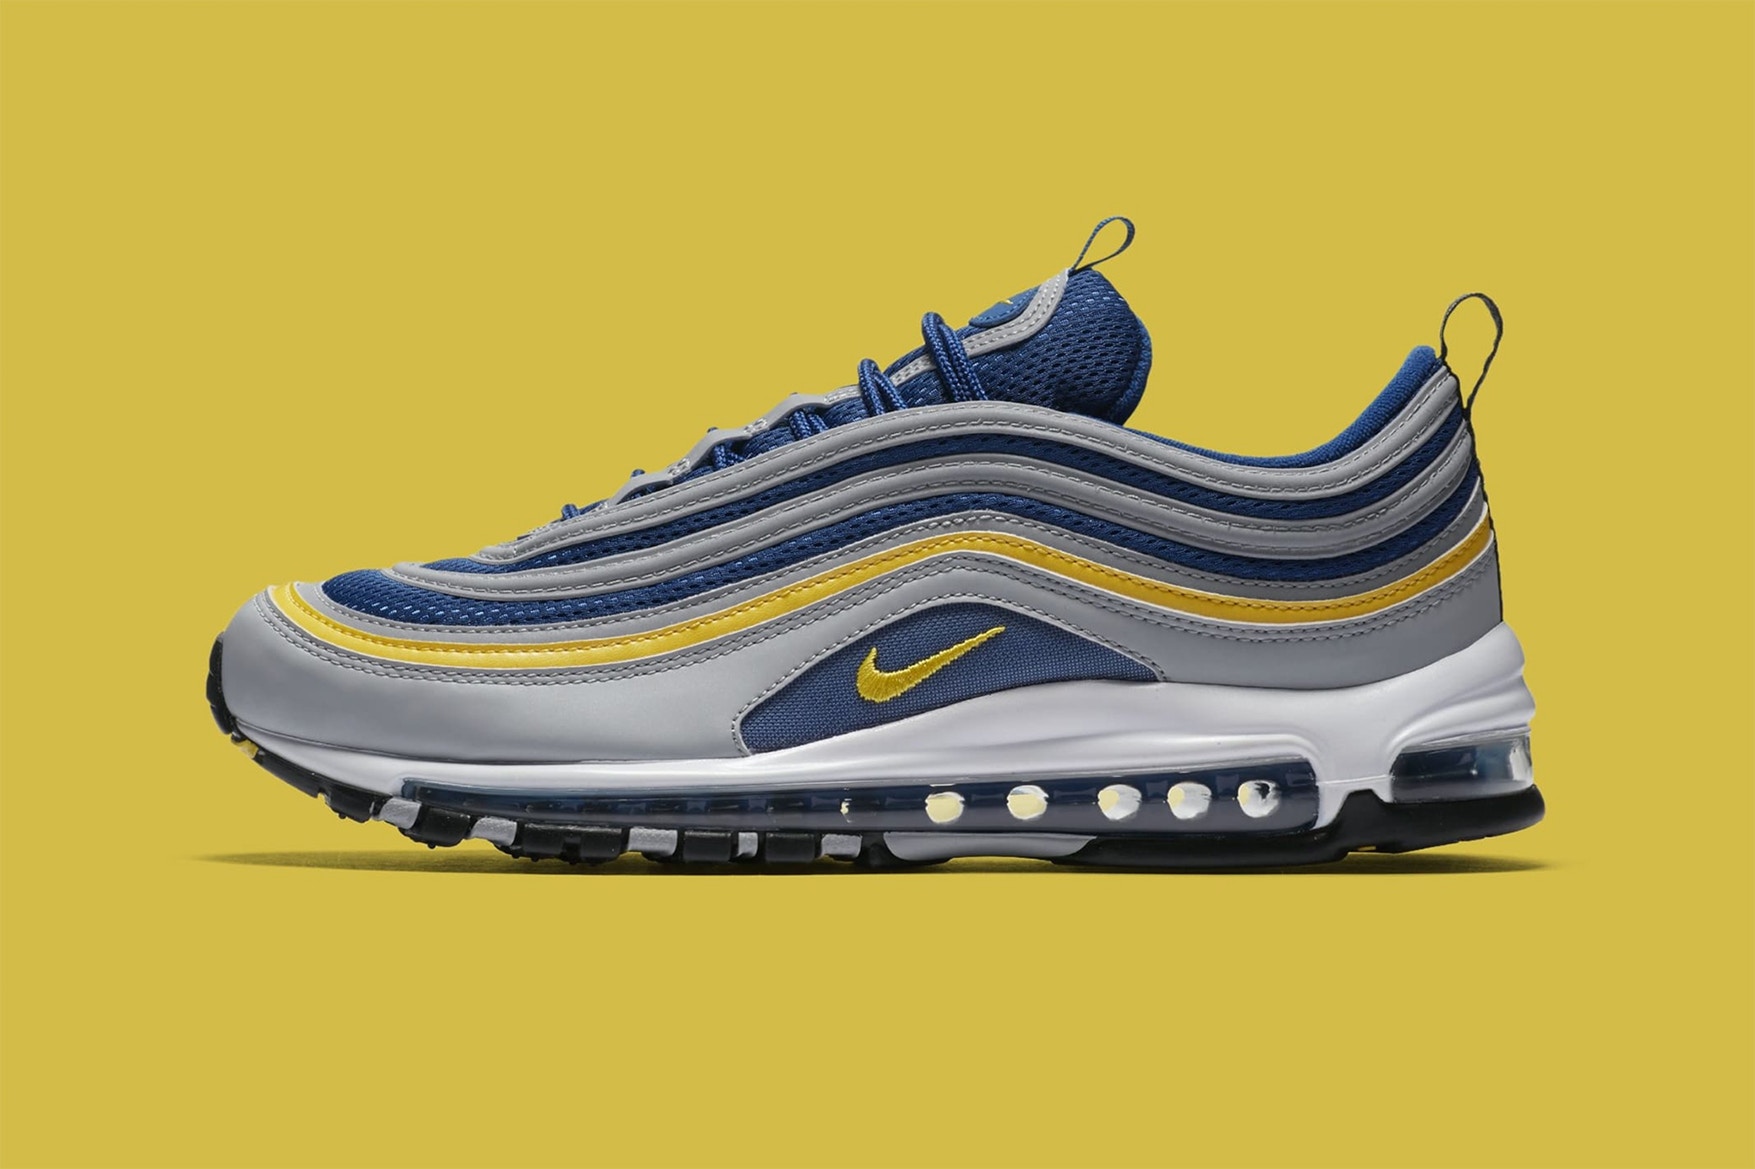 nike-air-max-97-wolf-grey-tour-yellow-gym-blue-release-01